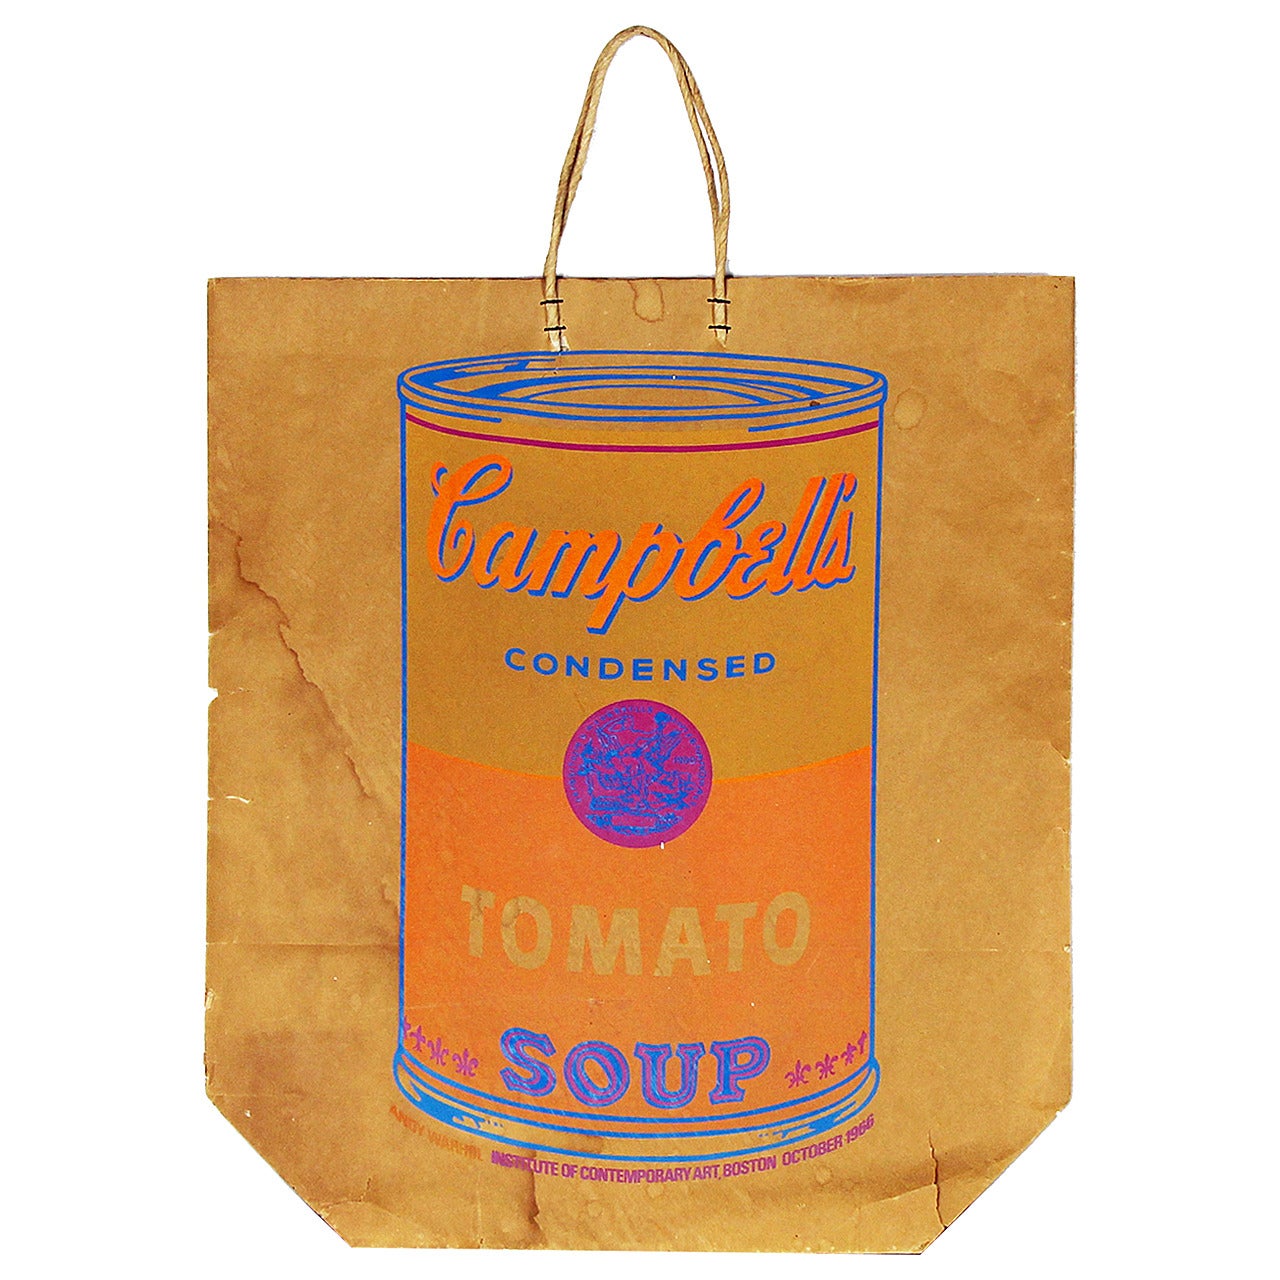 Andy Warhol Campbell’s Tomato Soup Can Print on Shopping Bag, 1966